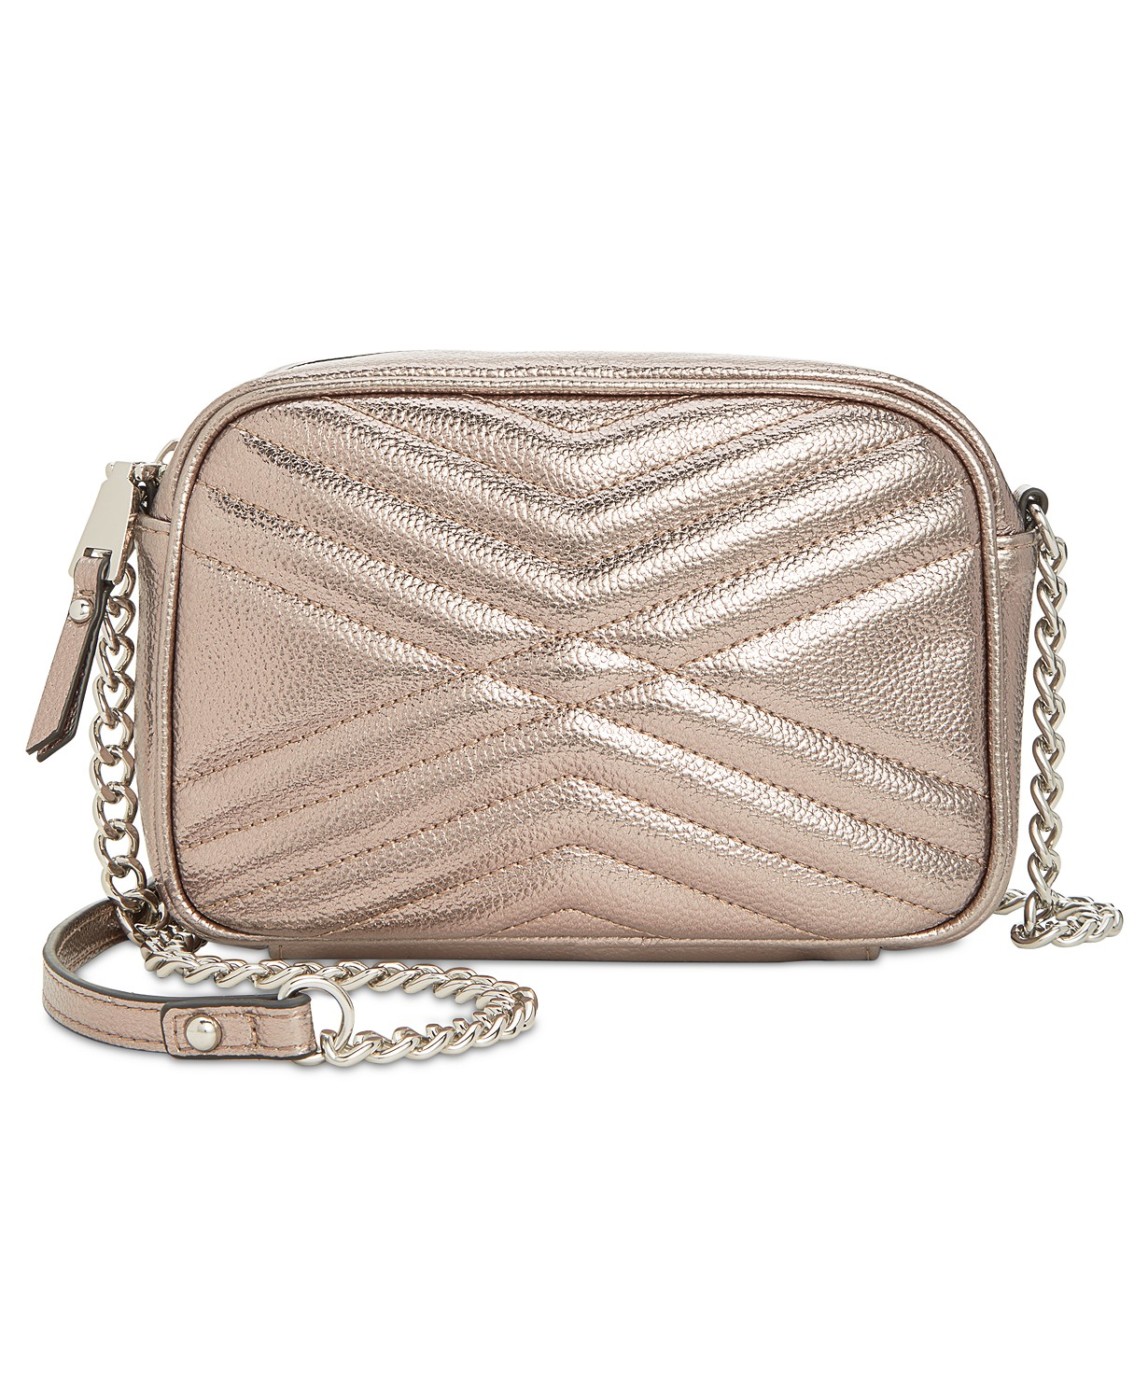 woocommerce-673321-2209615.cloudwaysapps.com-inc-international-concepts-glam-silver-metallic-quilted-camera-crossbody-bag